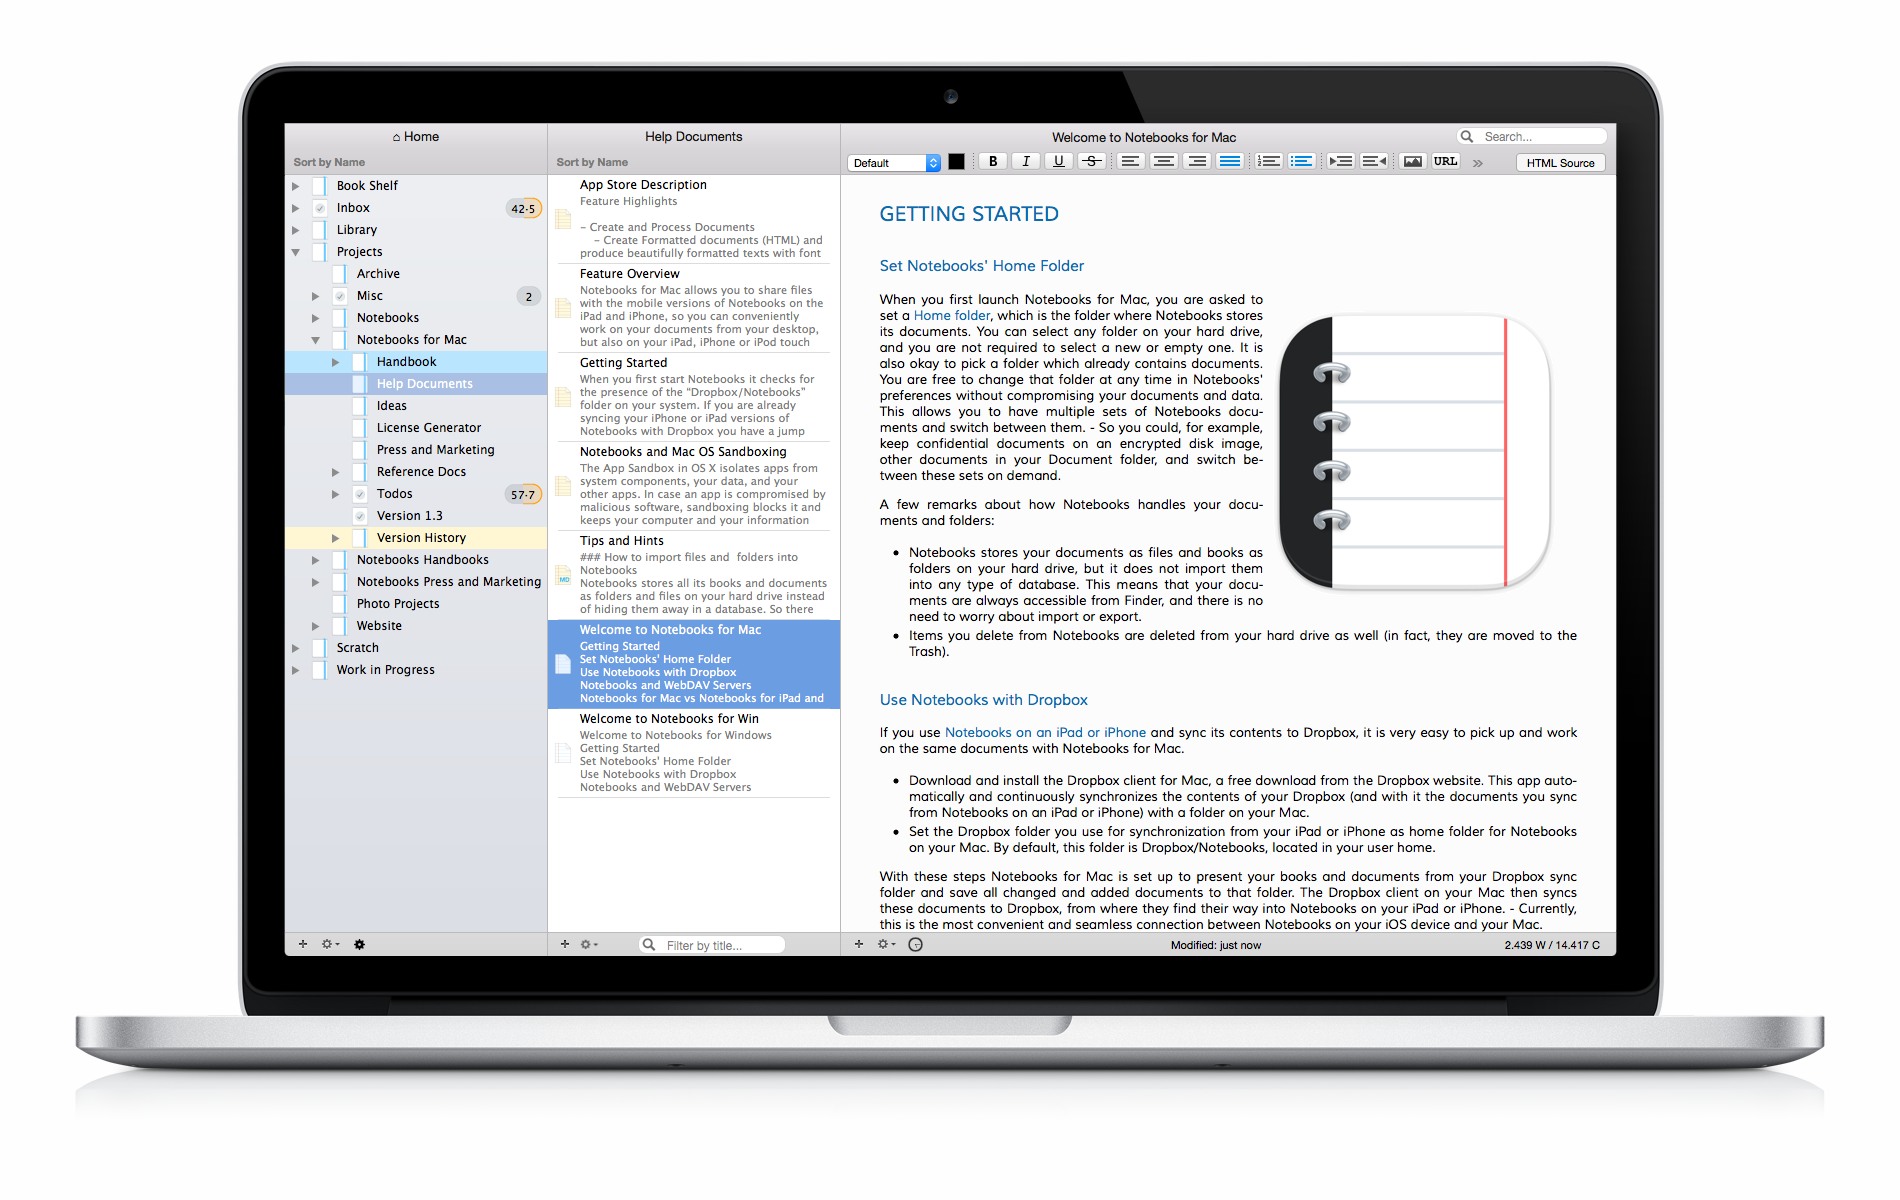 Notebooks for Mac